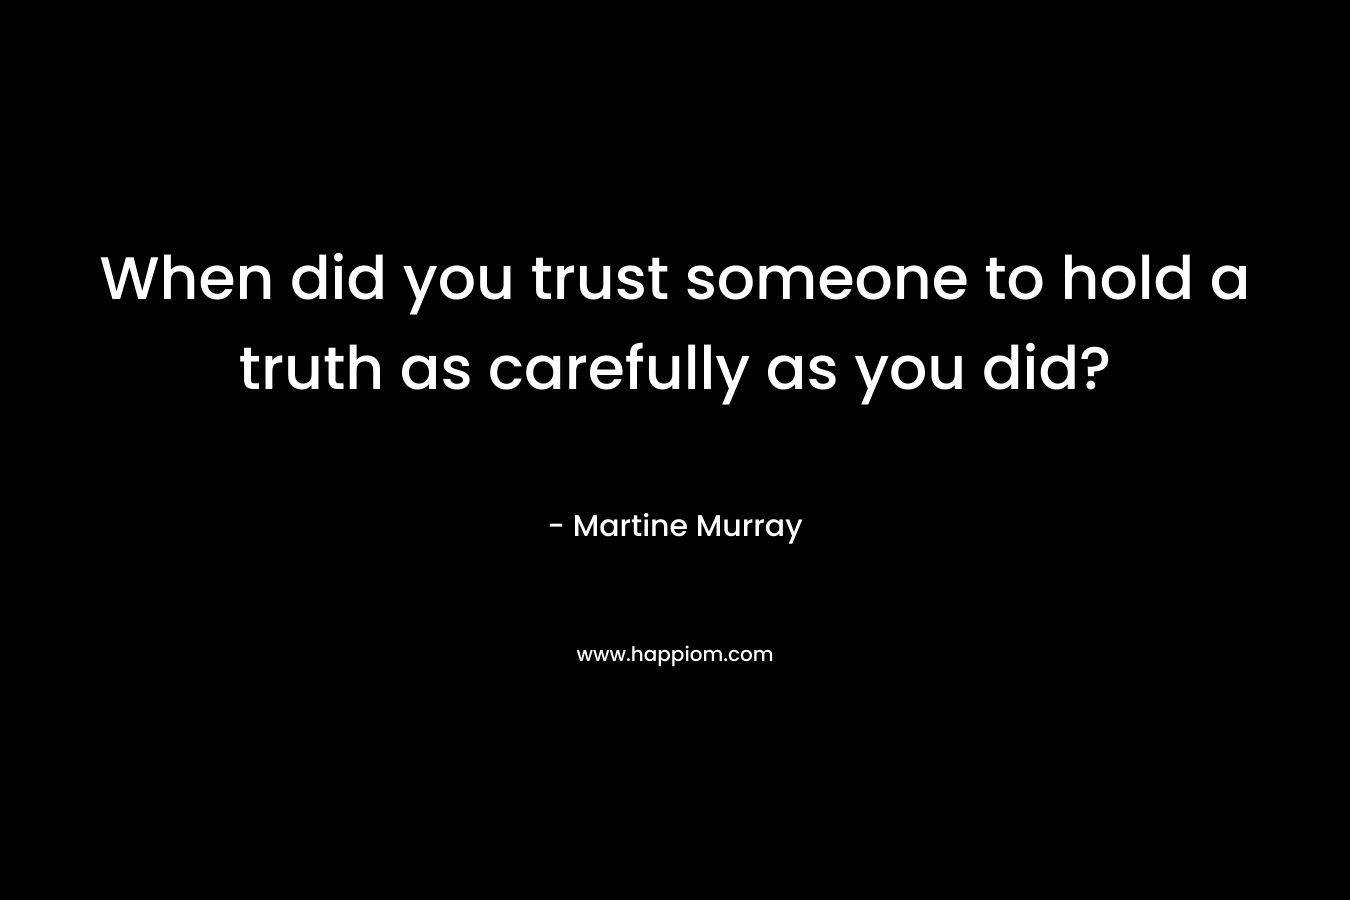 When did you trust someone to hold a truth as carefully as you did?